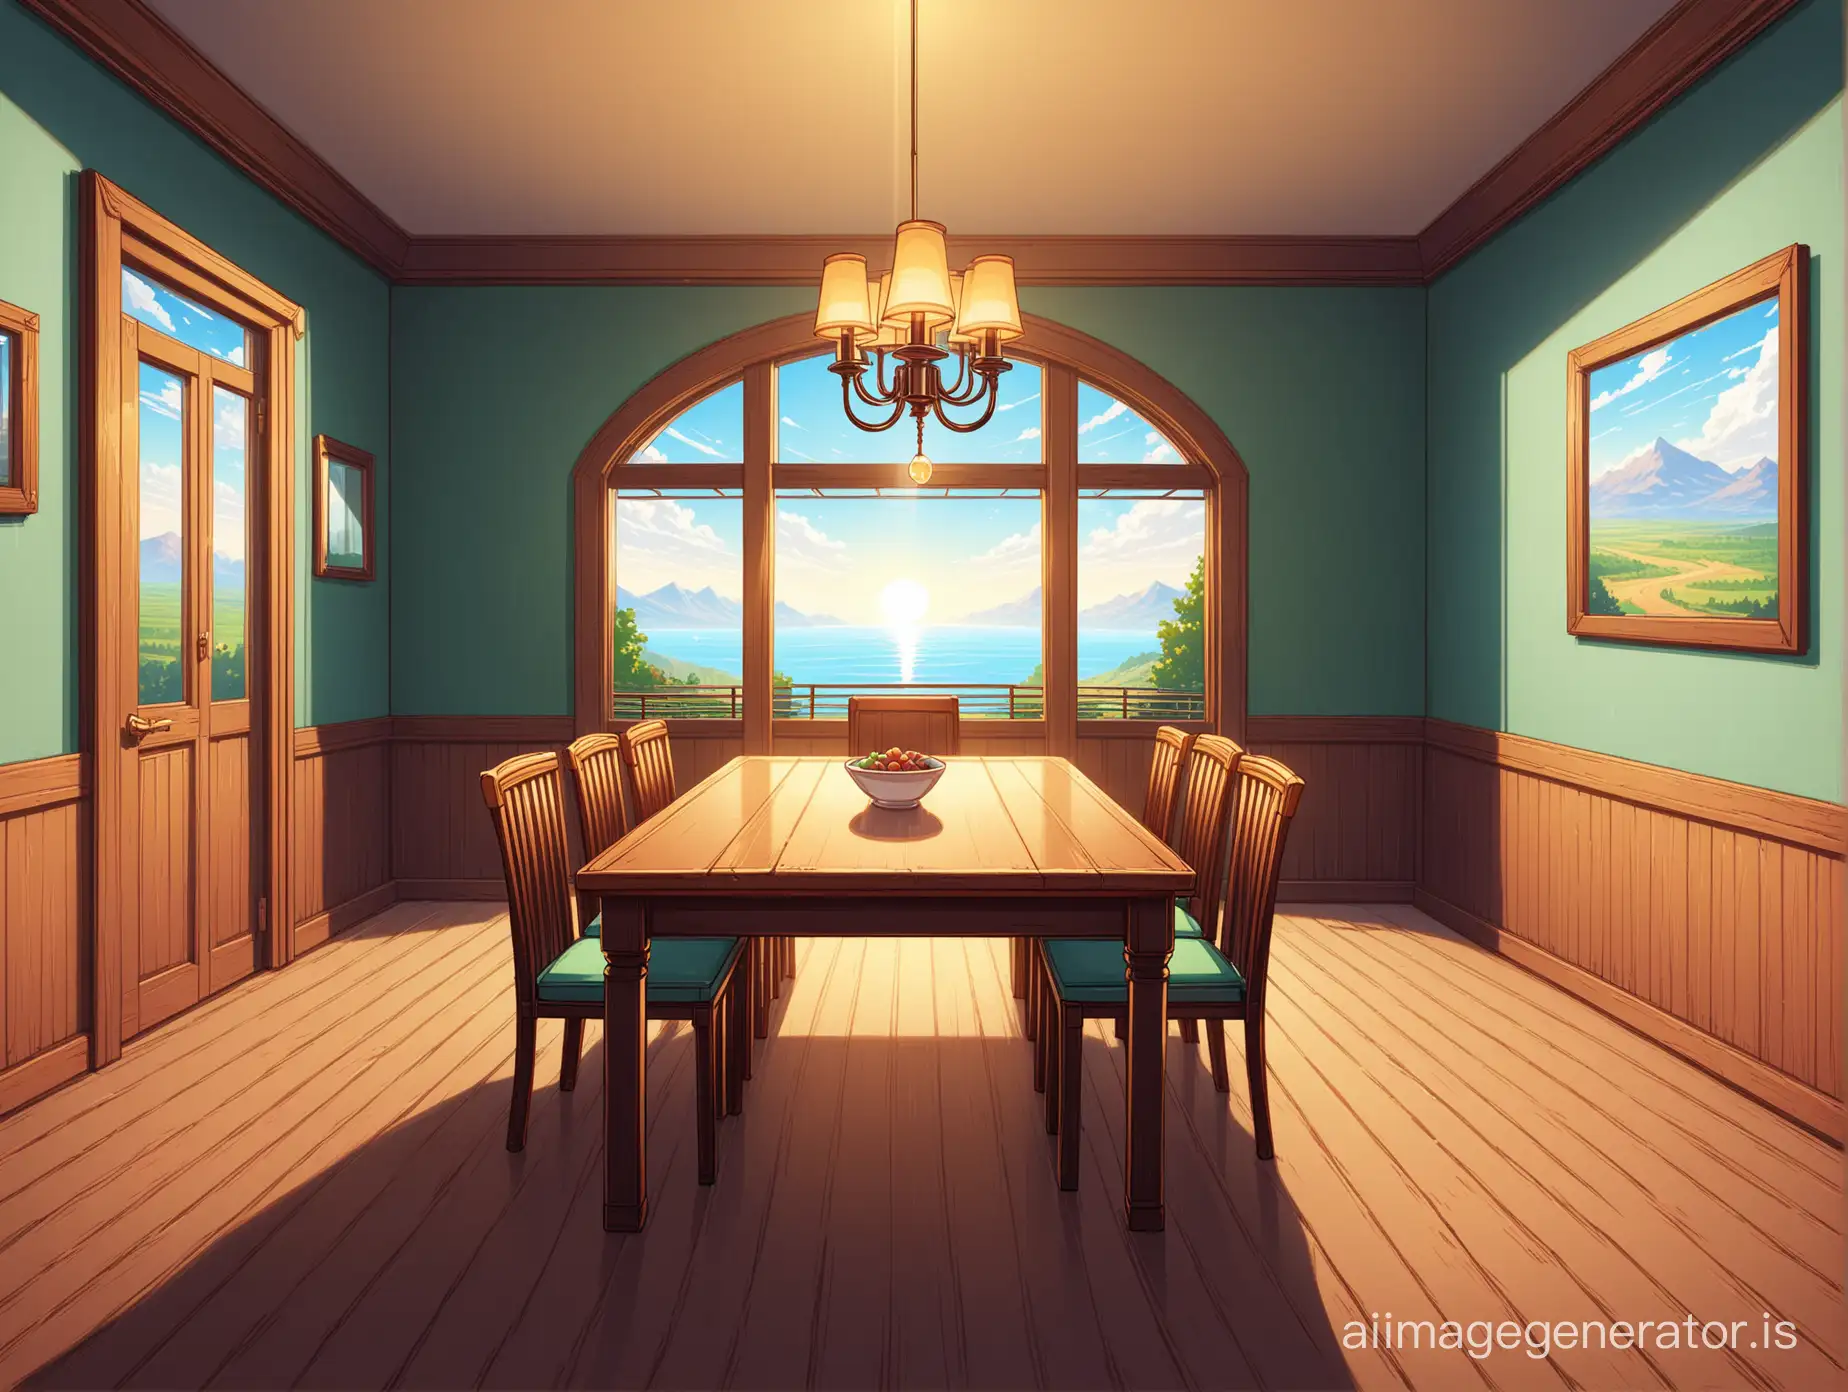 Dining-Room-Game-Art-with-Vanishing-Point-Perspective